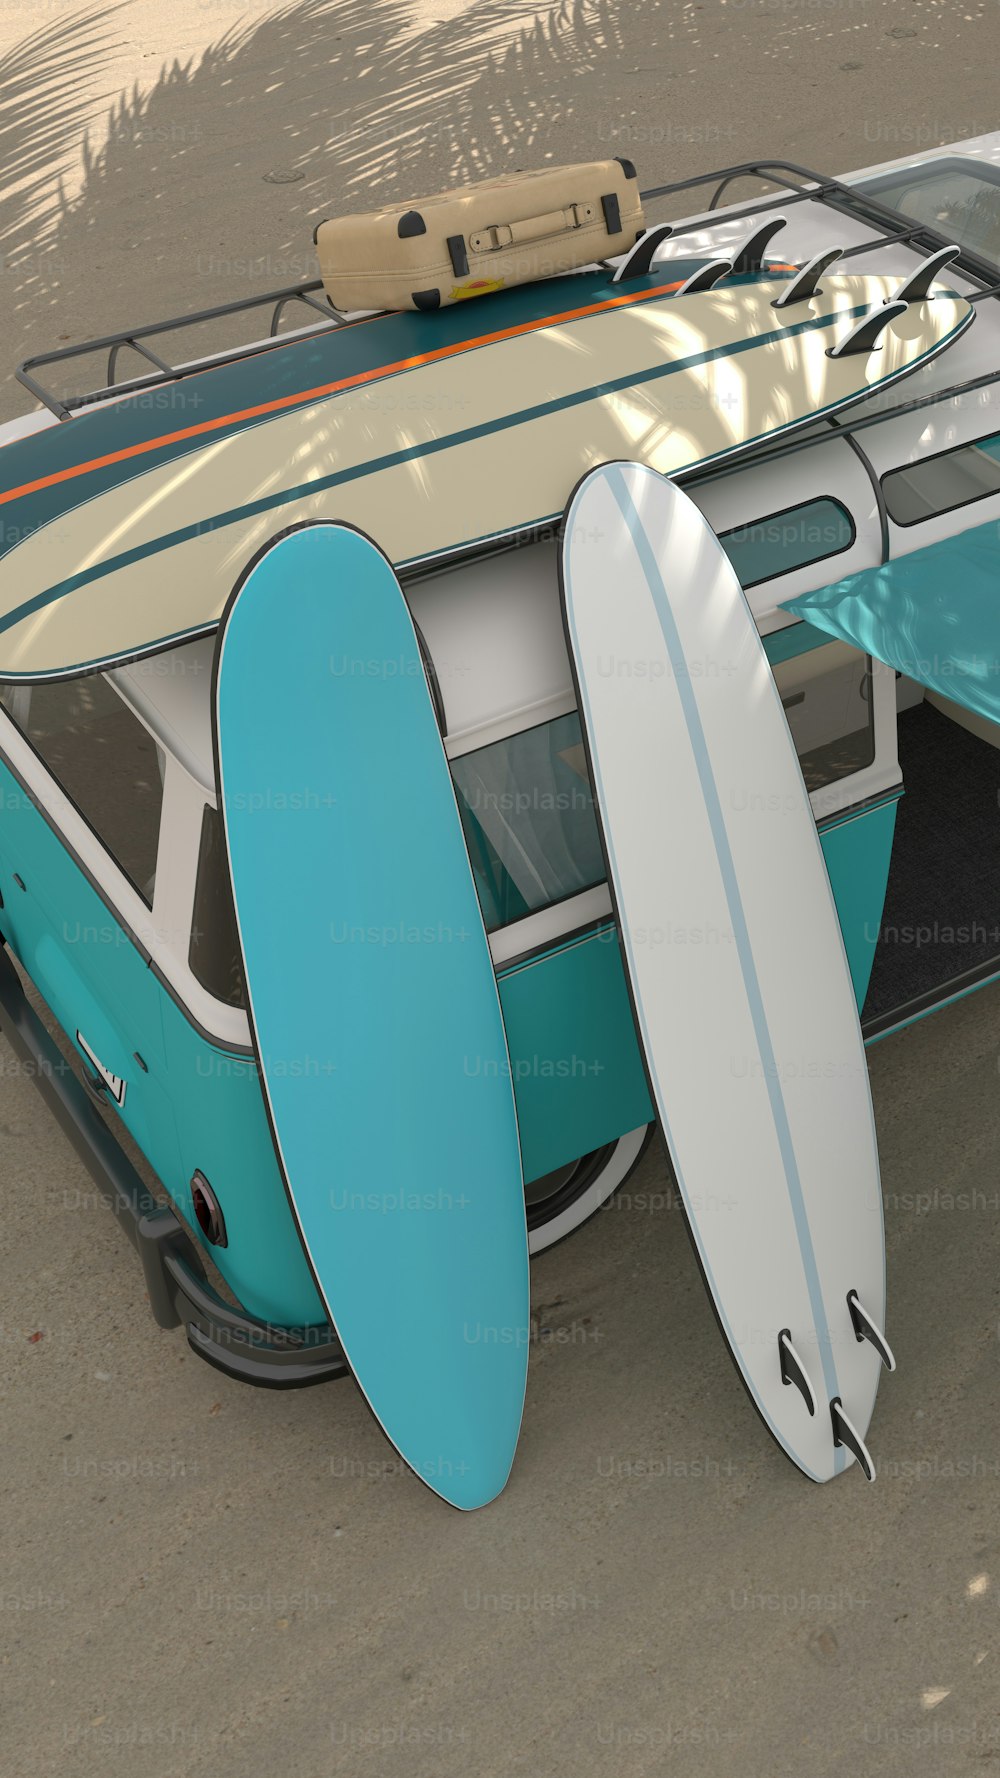 a surfboard sitting on top of a surfboard rack